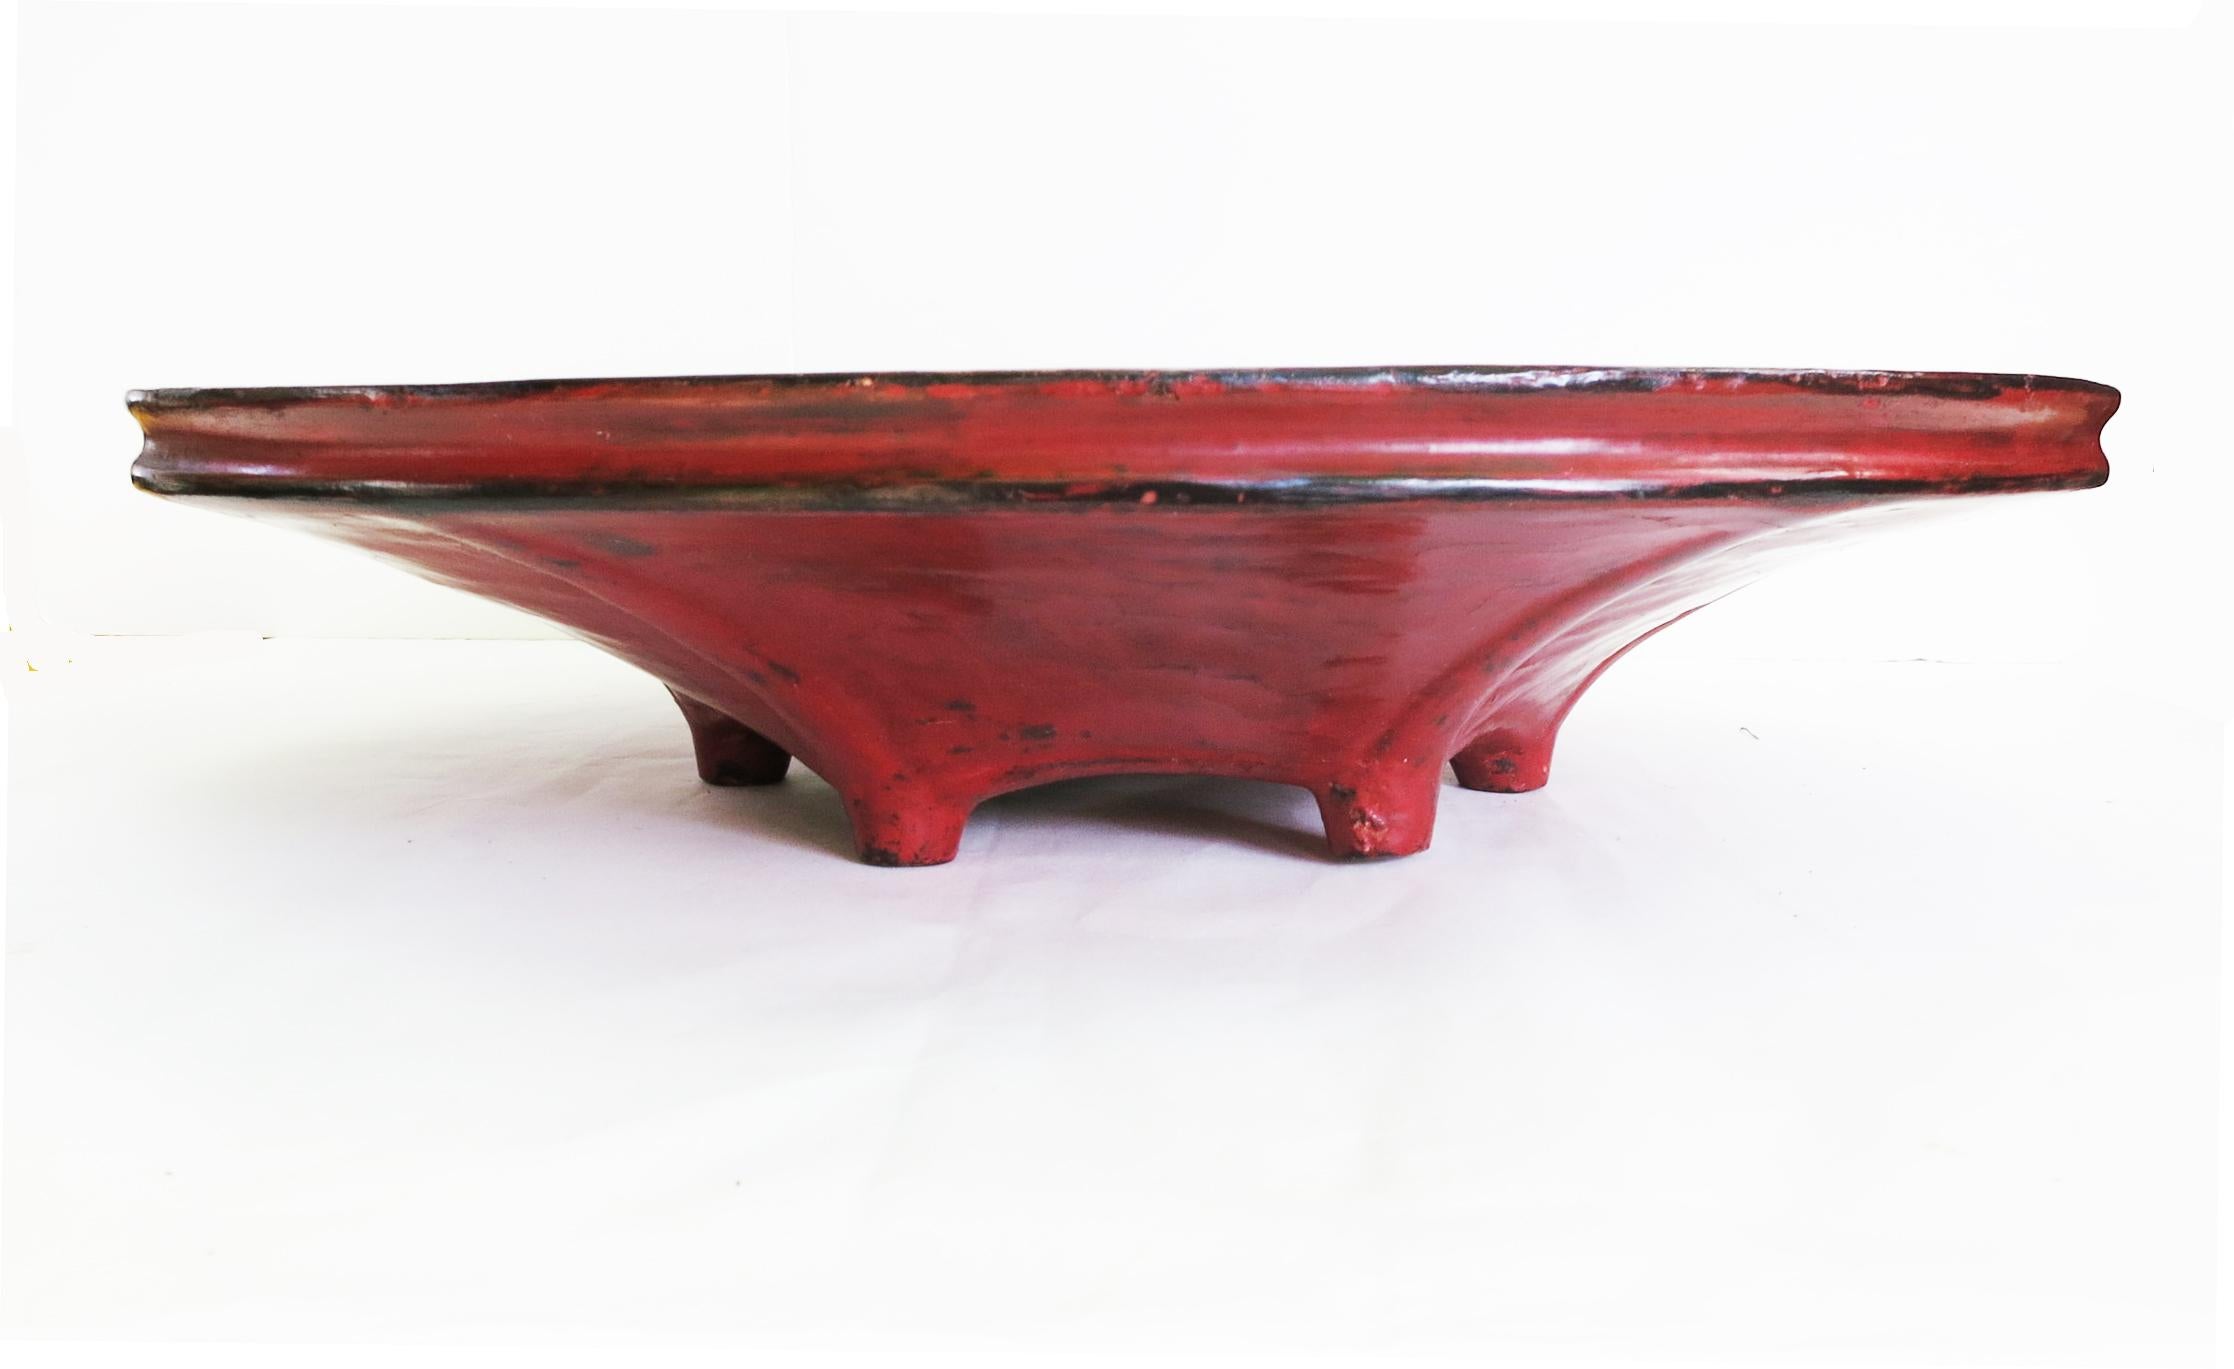 Burmese (Myanmar) Lacquerware has a long tradition dating back to the 13th century. Lacquer in Burma is called “Thitsi” meaning the sap of a Thitsi Tree (Melanhorrea Usitata). Typically, bamboo and wood are used as a frame or base in making lacquer